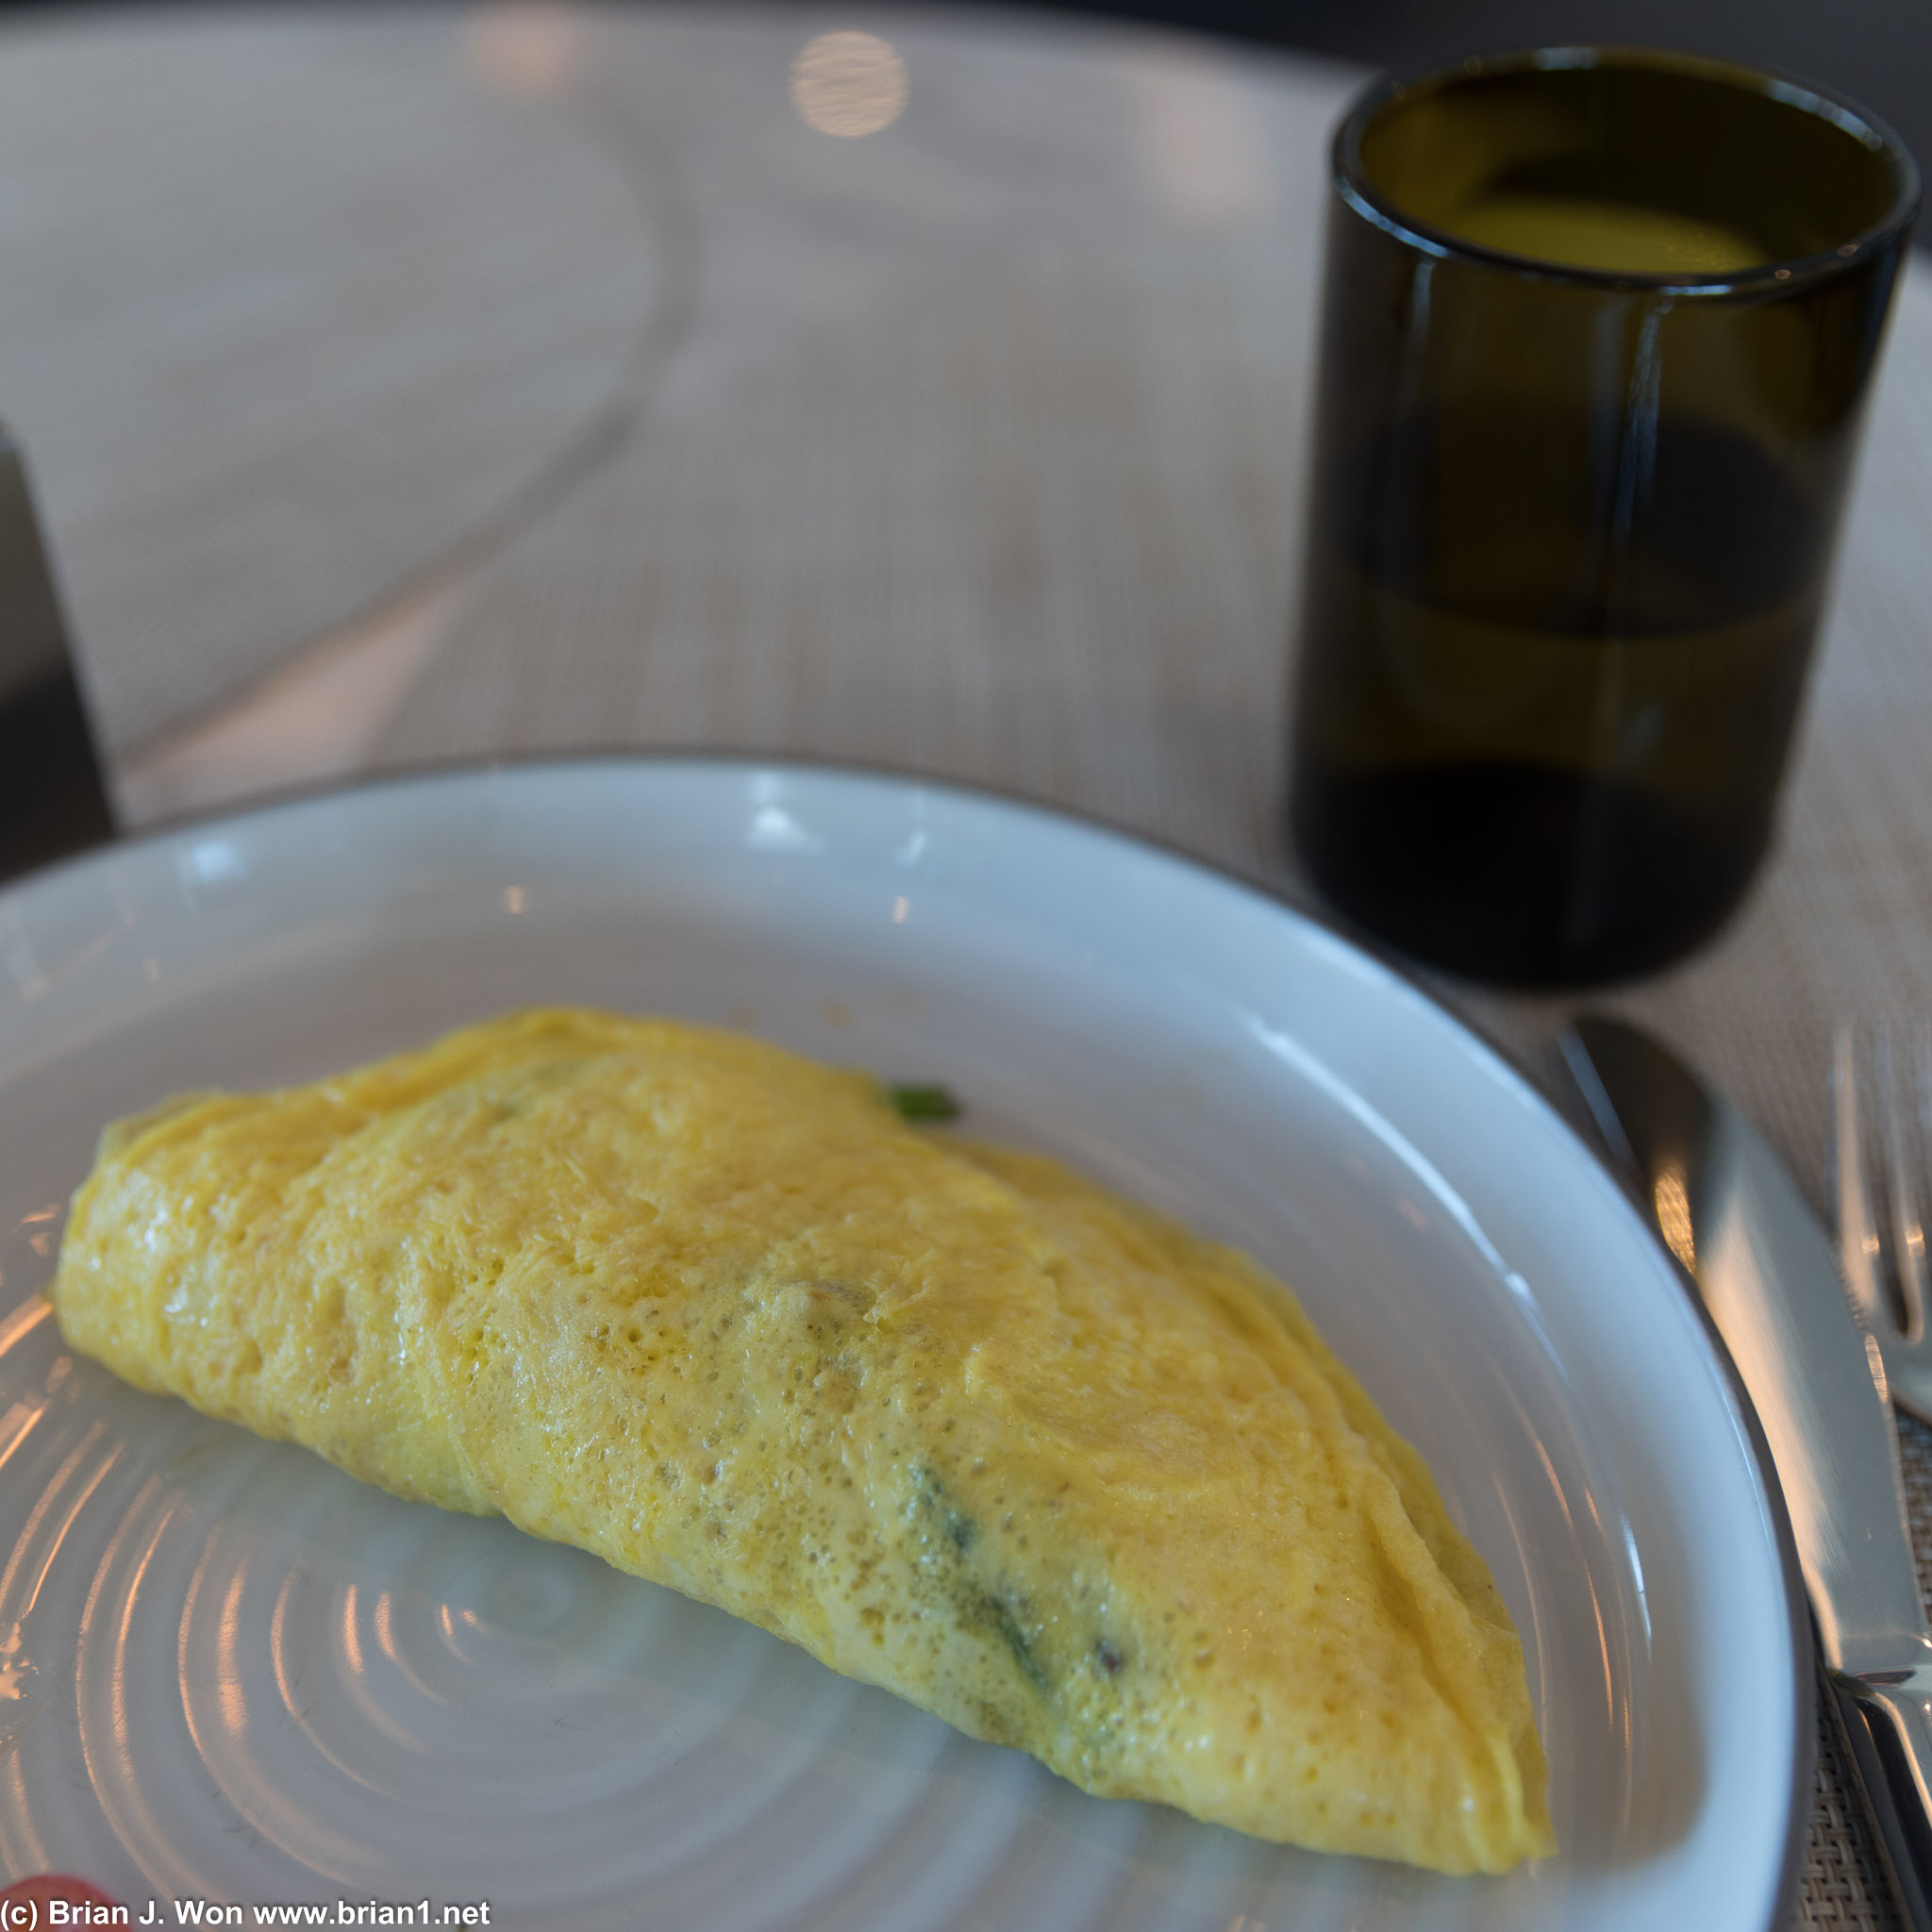 Omelette wasn't bad. More like eggs-folded-around the ingredients as opposed to cooked-with, tho.